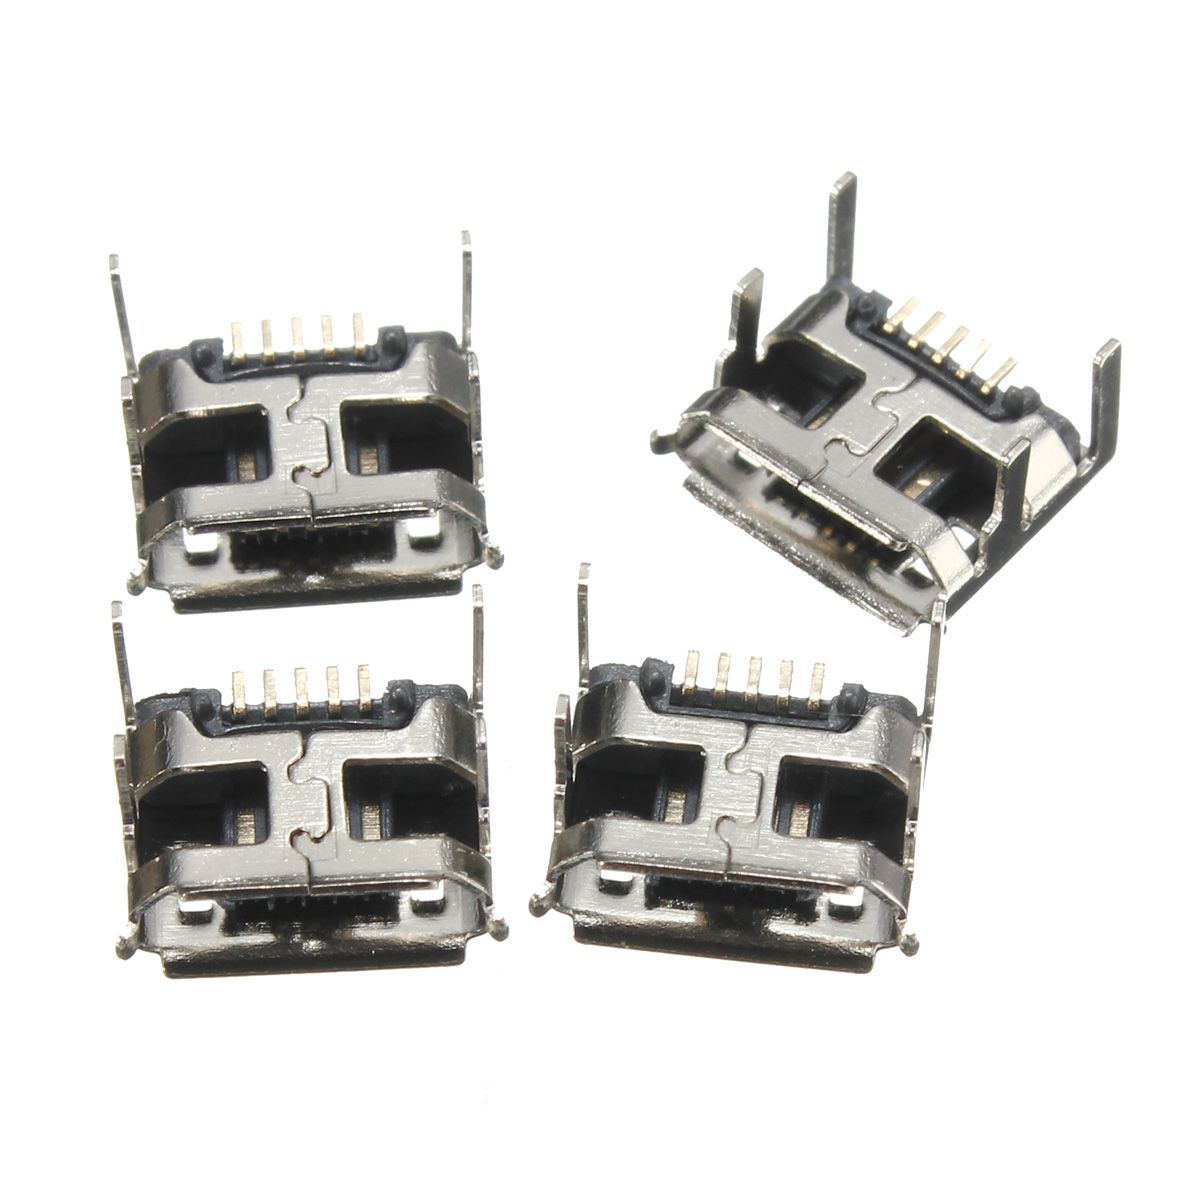 10pcs-Micro-USB-Type-B-5-Pin-Female-Socket-4-Vertical-Legs-For-Solder-Connector-1356004